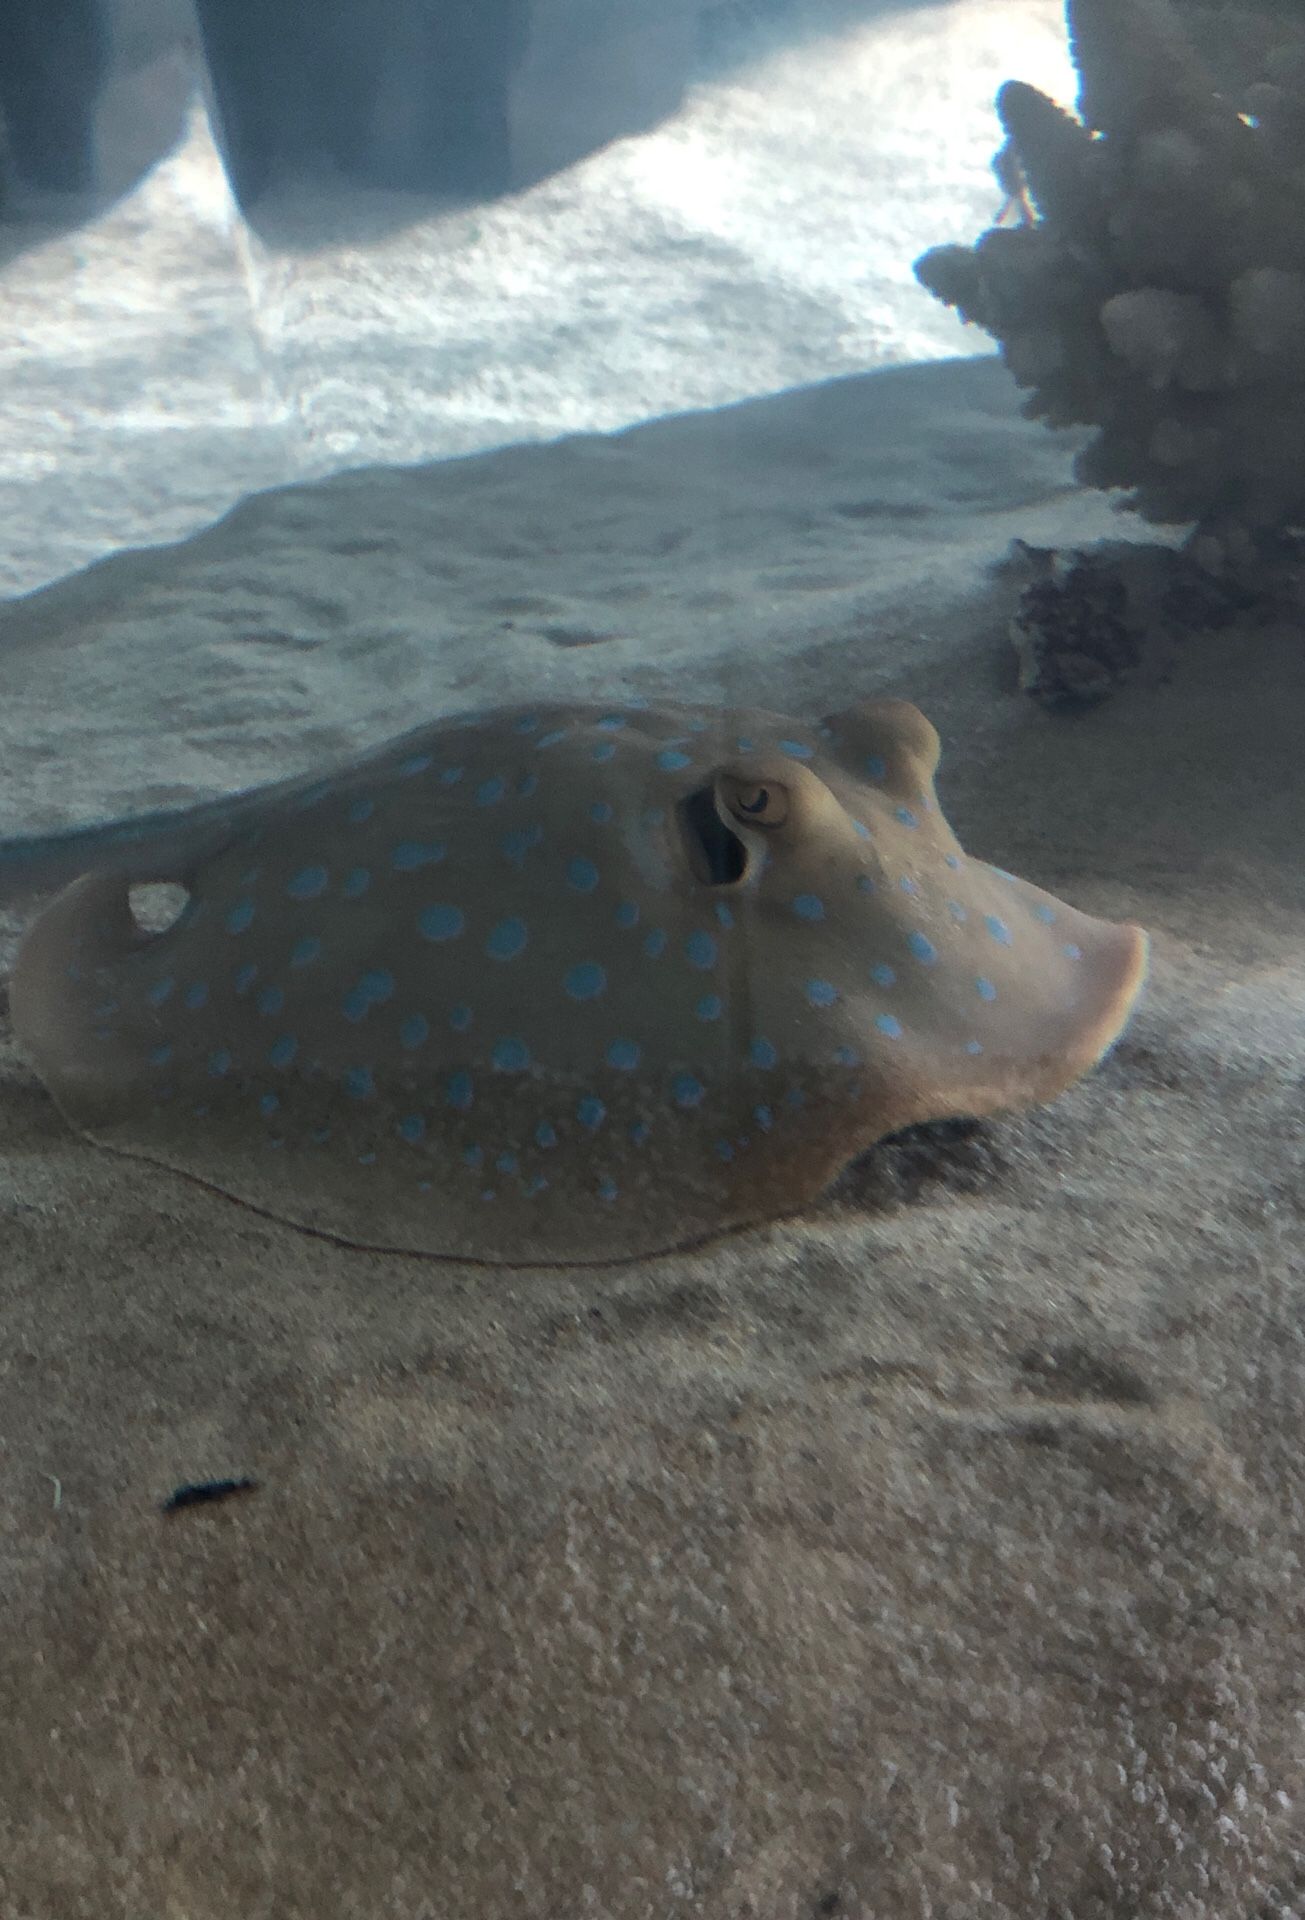 Indonesian blue spotted sting ray up for adoption (fee) needs a > 100gal